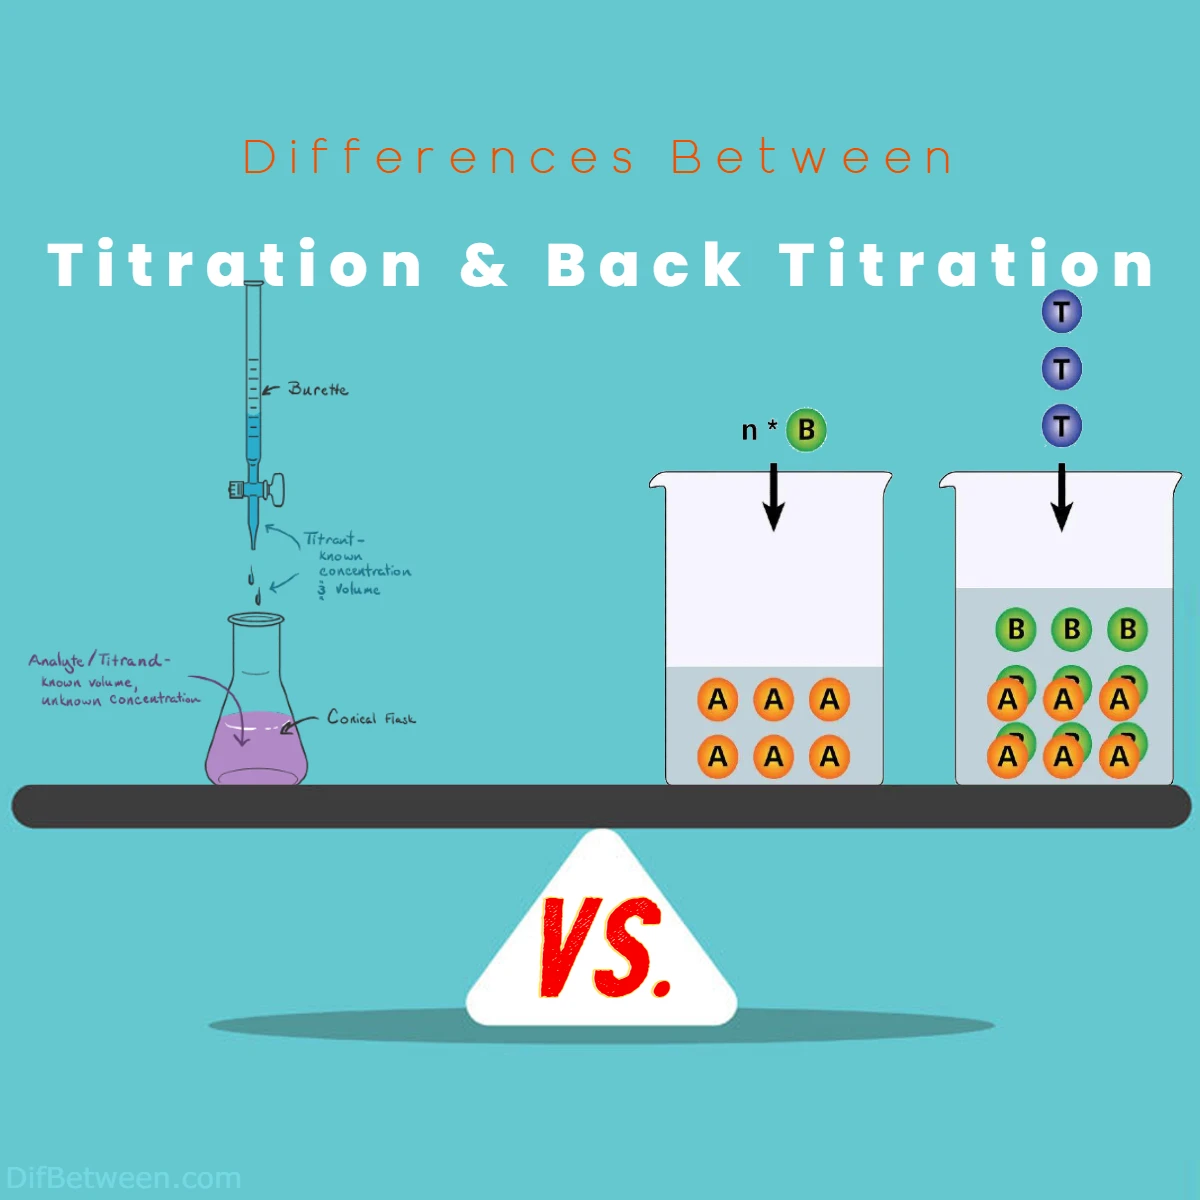 Difference Between Back Titration and Titration